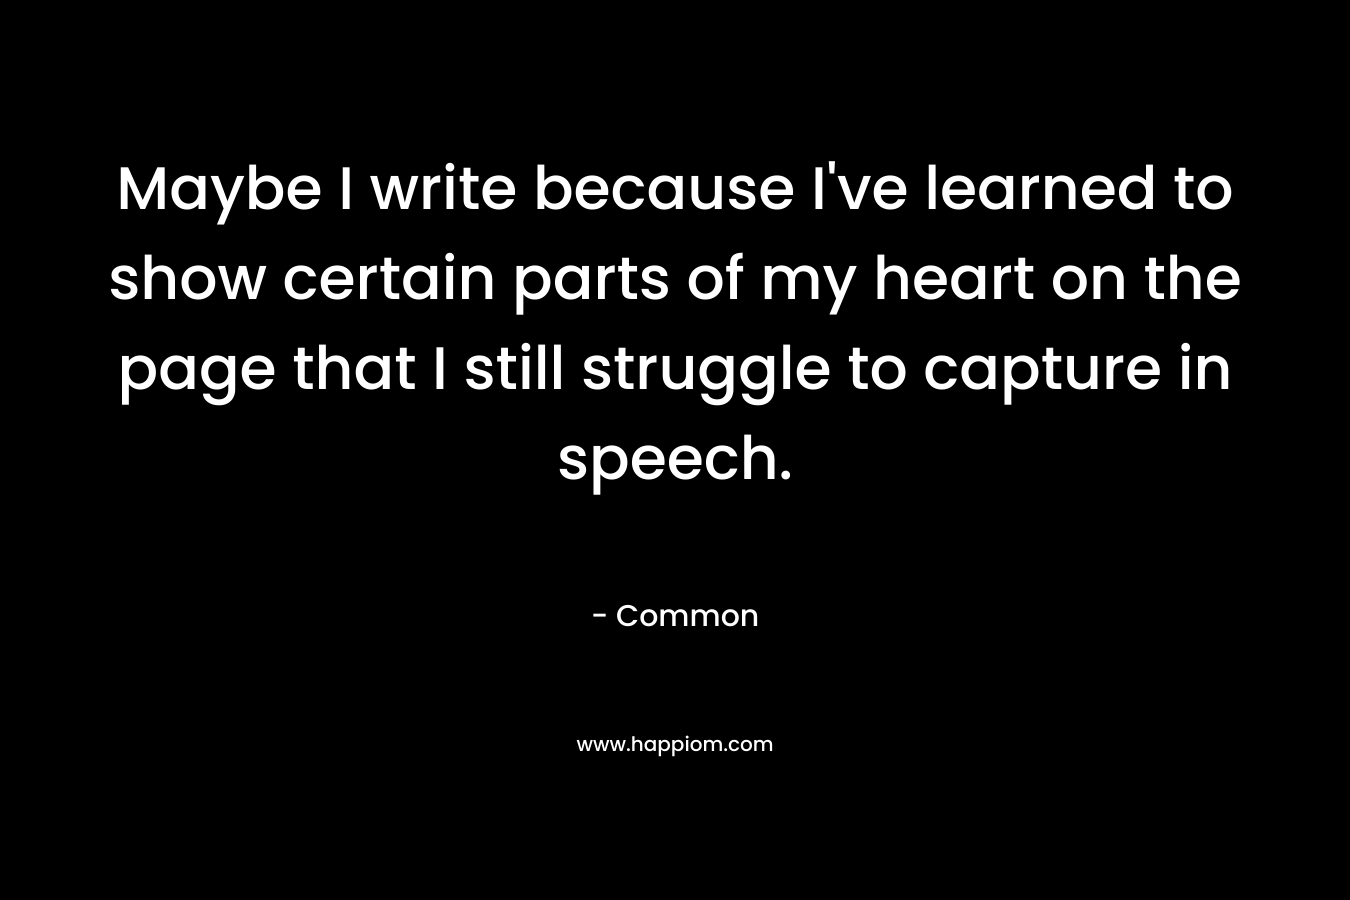 Maybe I write because I’ve learned to show certain parts of my heart on the page that I still struggle to capture in speech. – Common